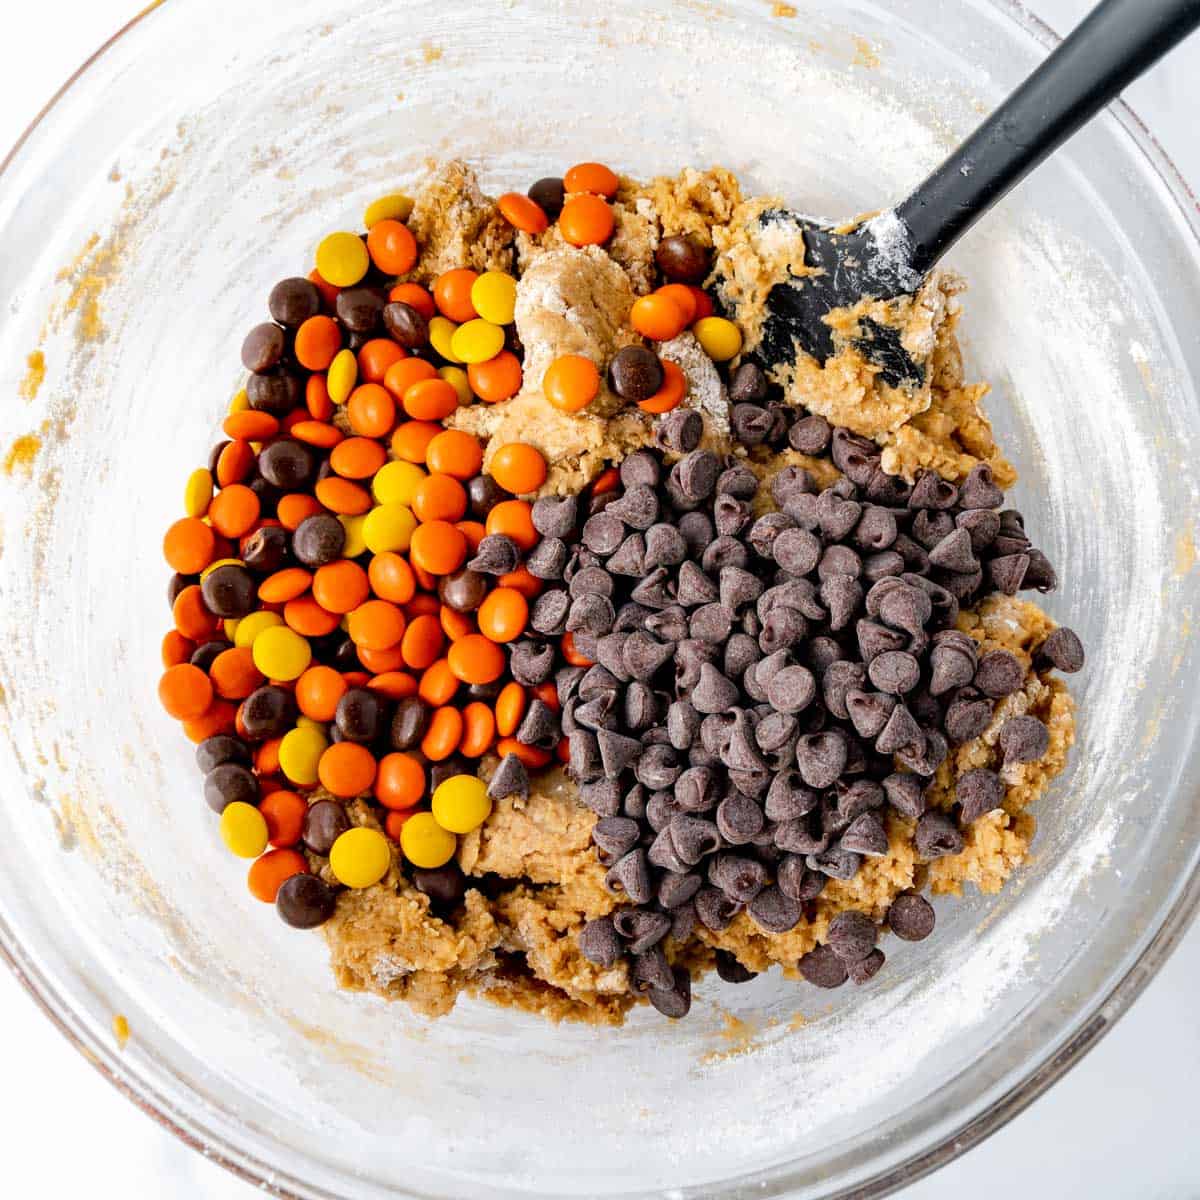 Chocolate chips and Reese's Pieces candy added to the peanut butter cookie dough